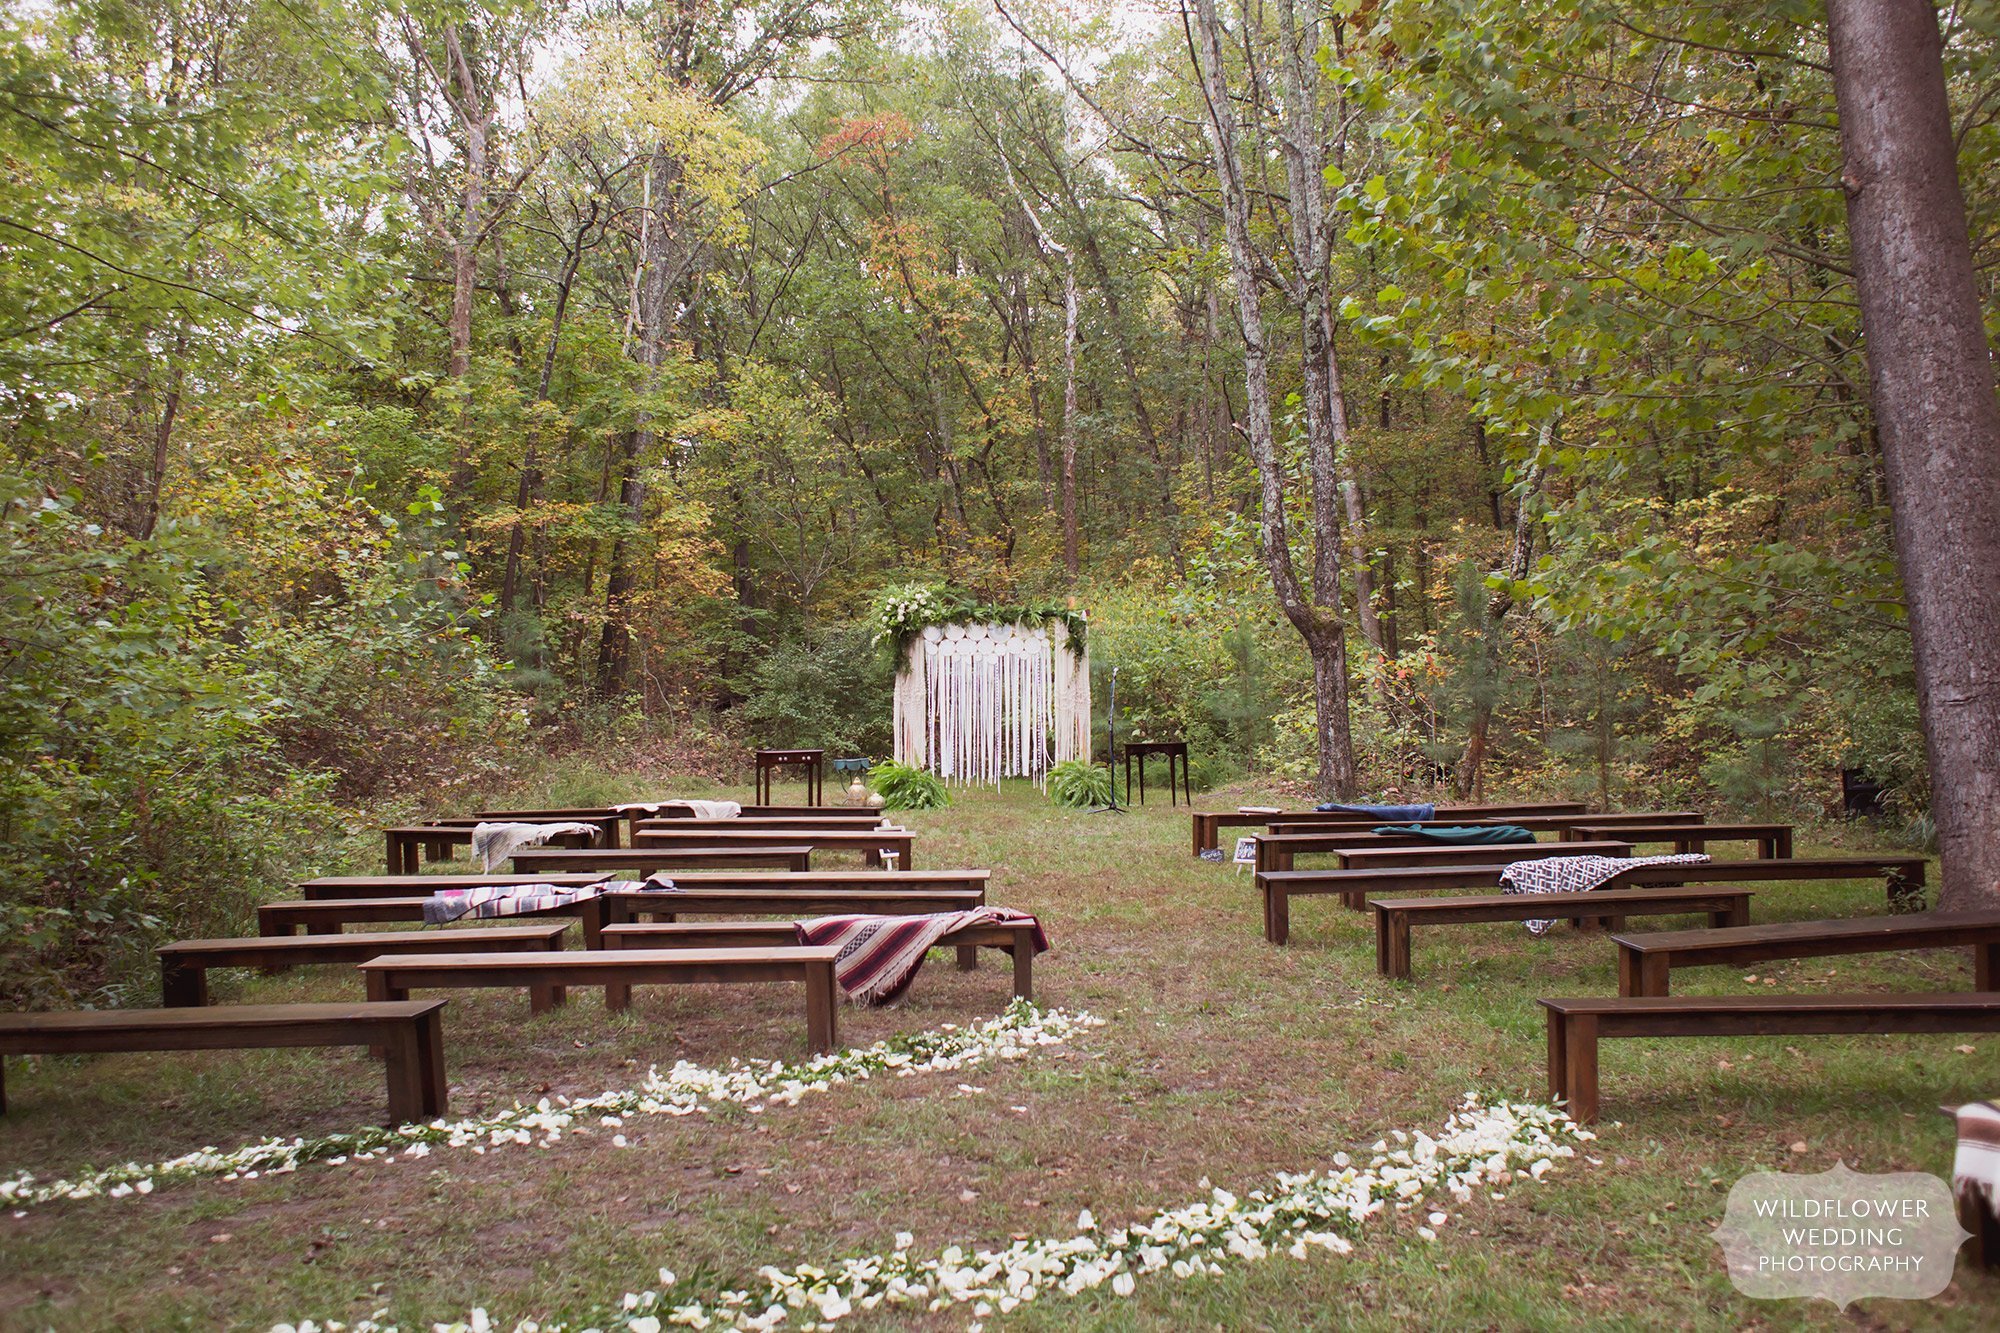 Bohemian woodsy wedding venue with outside ceremony space at the Little Piney Lodge.